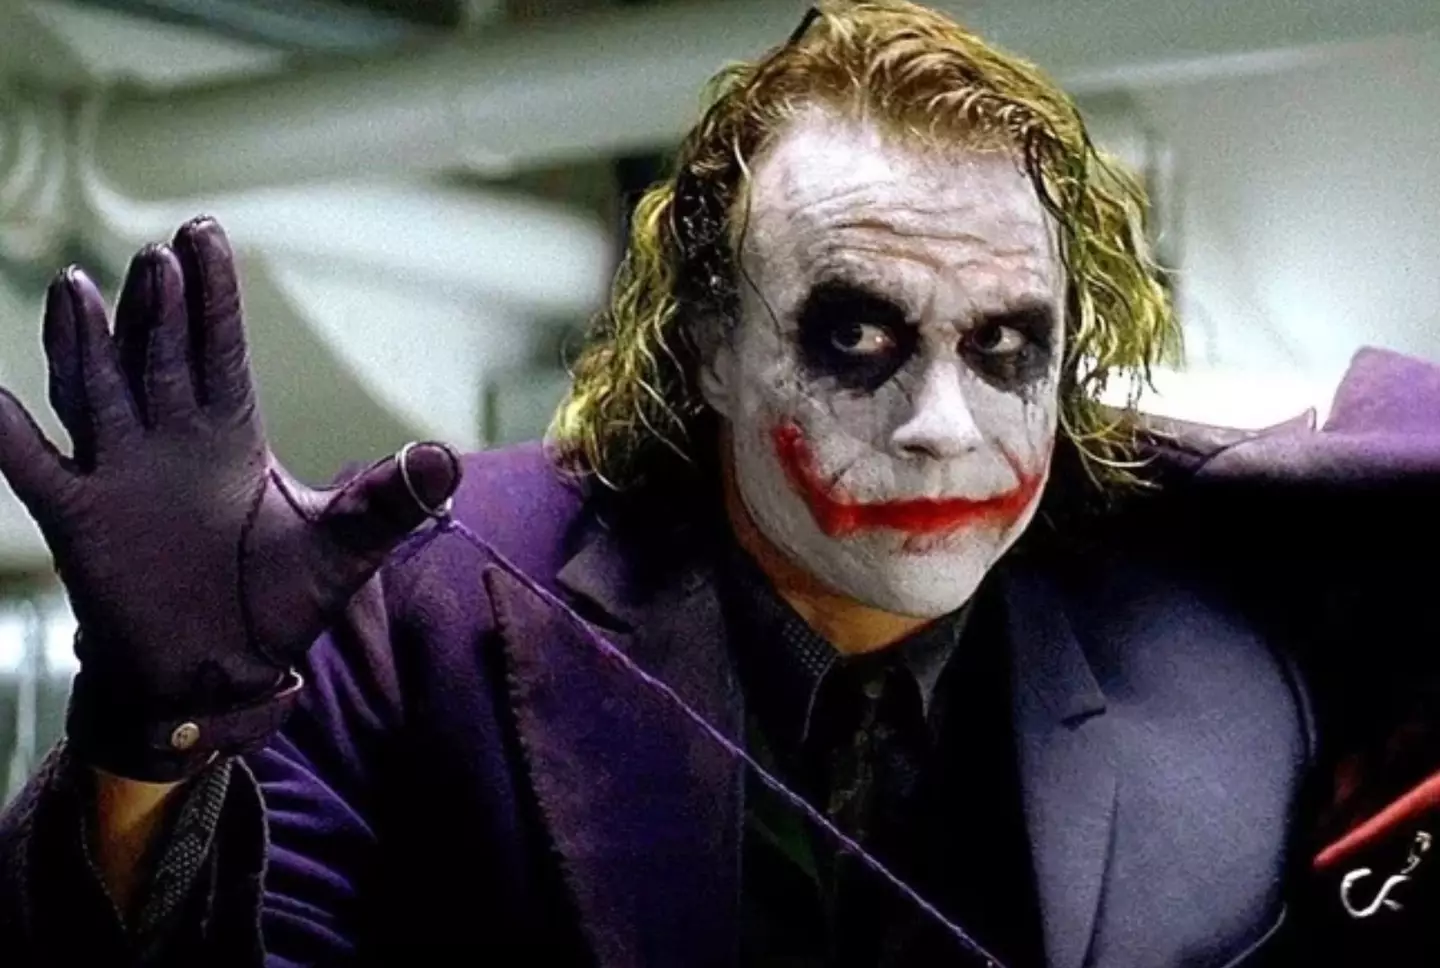 Heath Ledger wanted to work on another Batman movie.